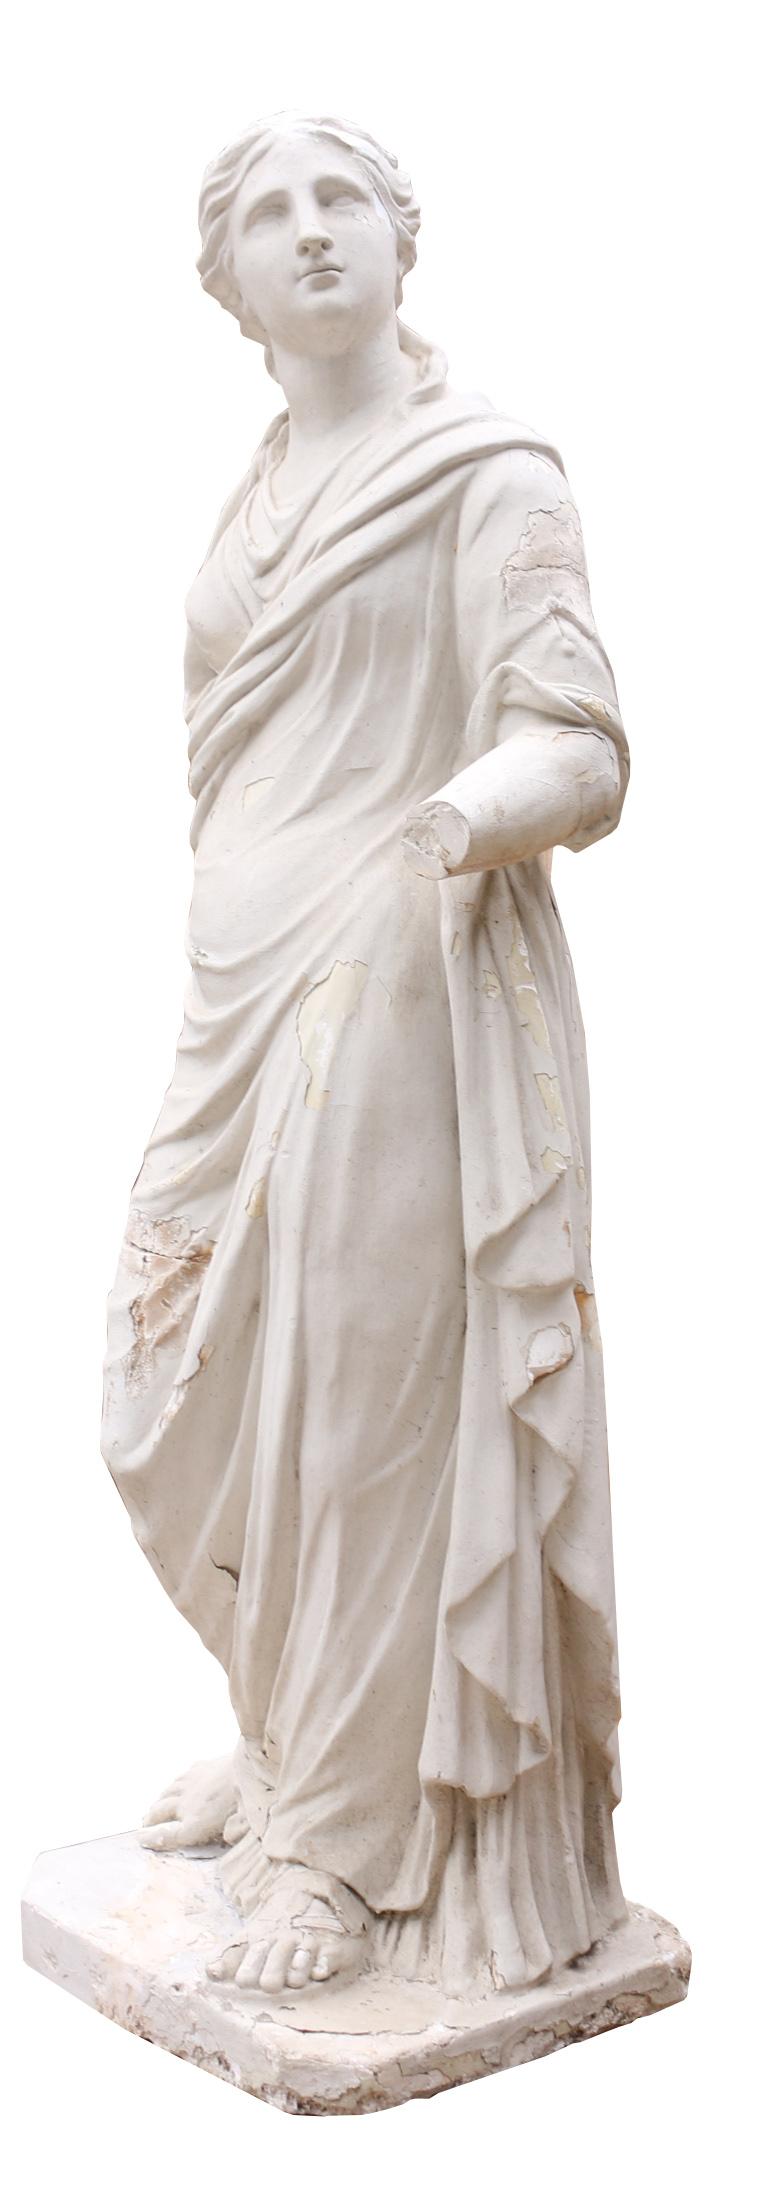 This life size statue dates to the late 19th century and is made from plaster.

This statue is weathered and has various losses and repairs that are shown in the images.

Measures: Height 167 cm
Width 65 cm
Depth 50 cm

Weight 74 kg.